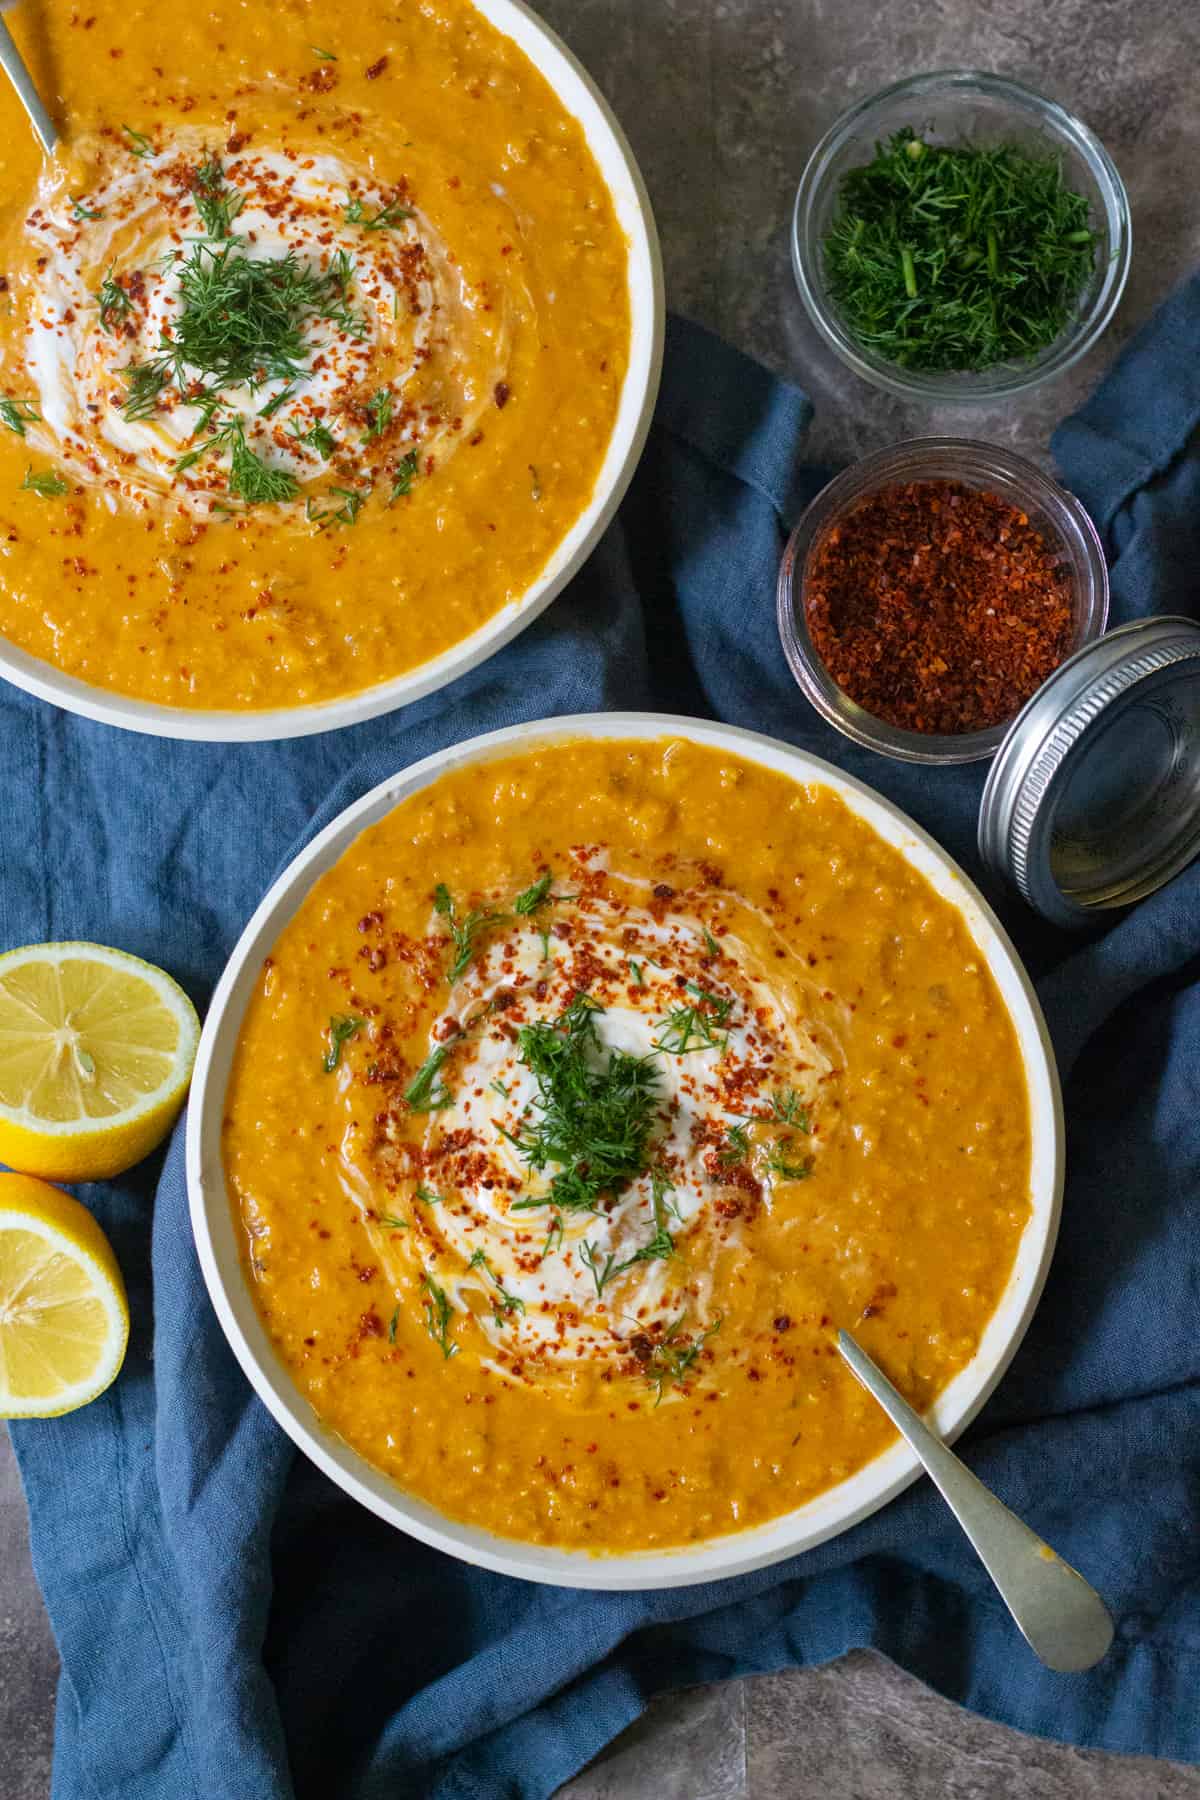 Curry lentil soup is an easy soup recipe that you can make with just a few ingredients. This lentil soup with coconut milk is very comforting. 